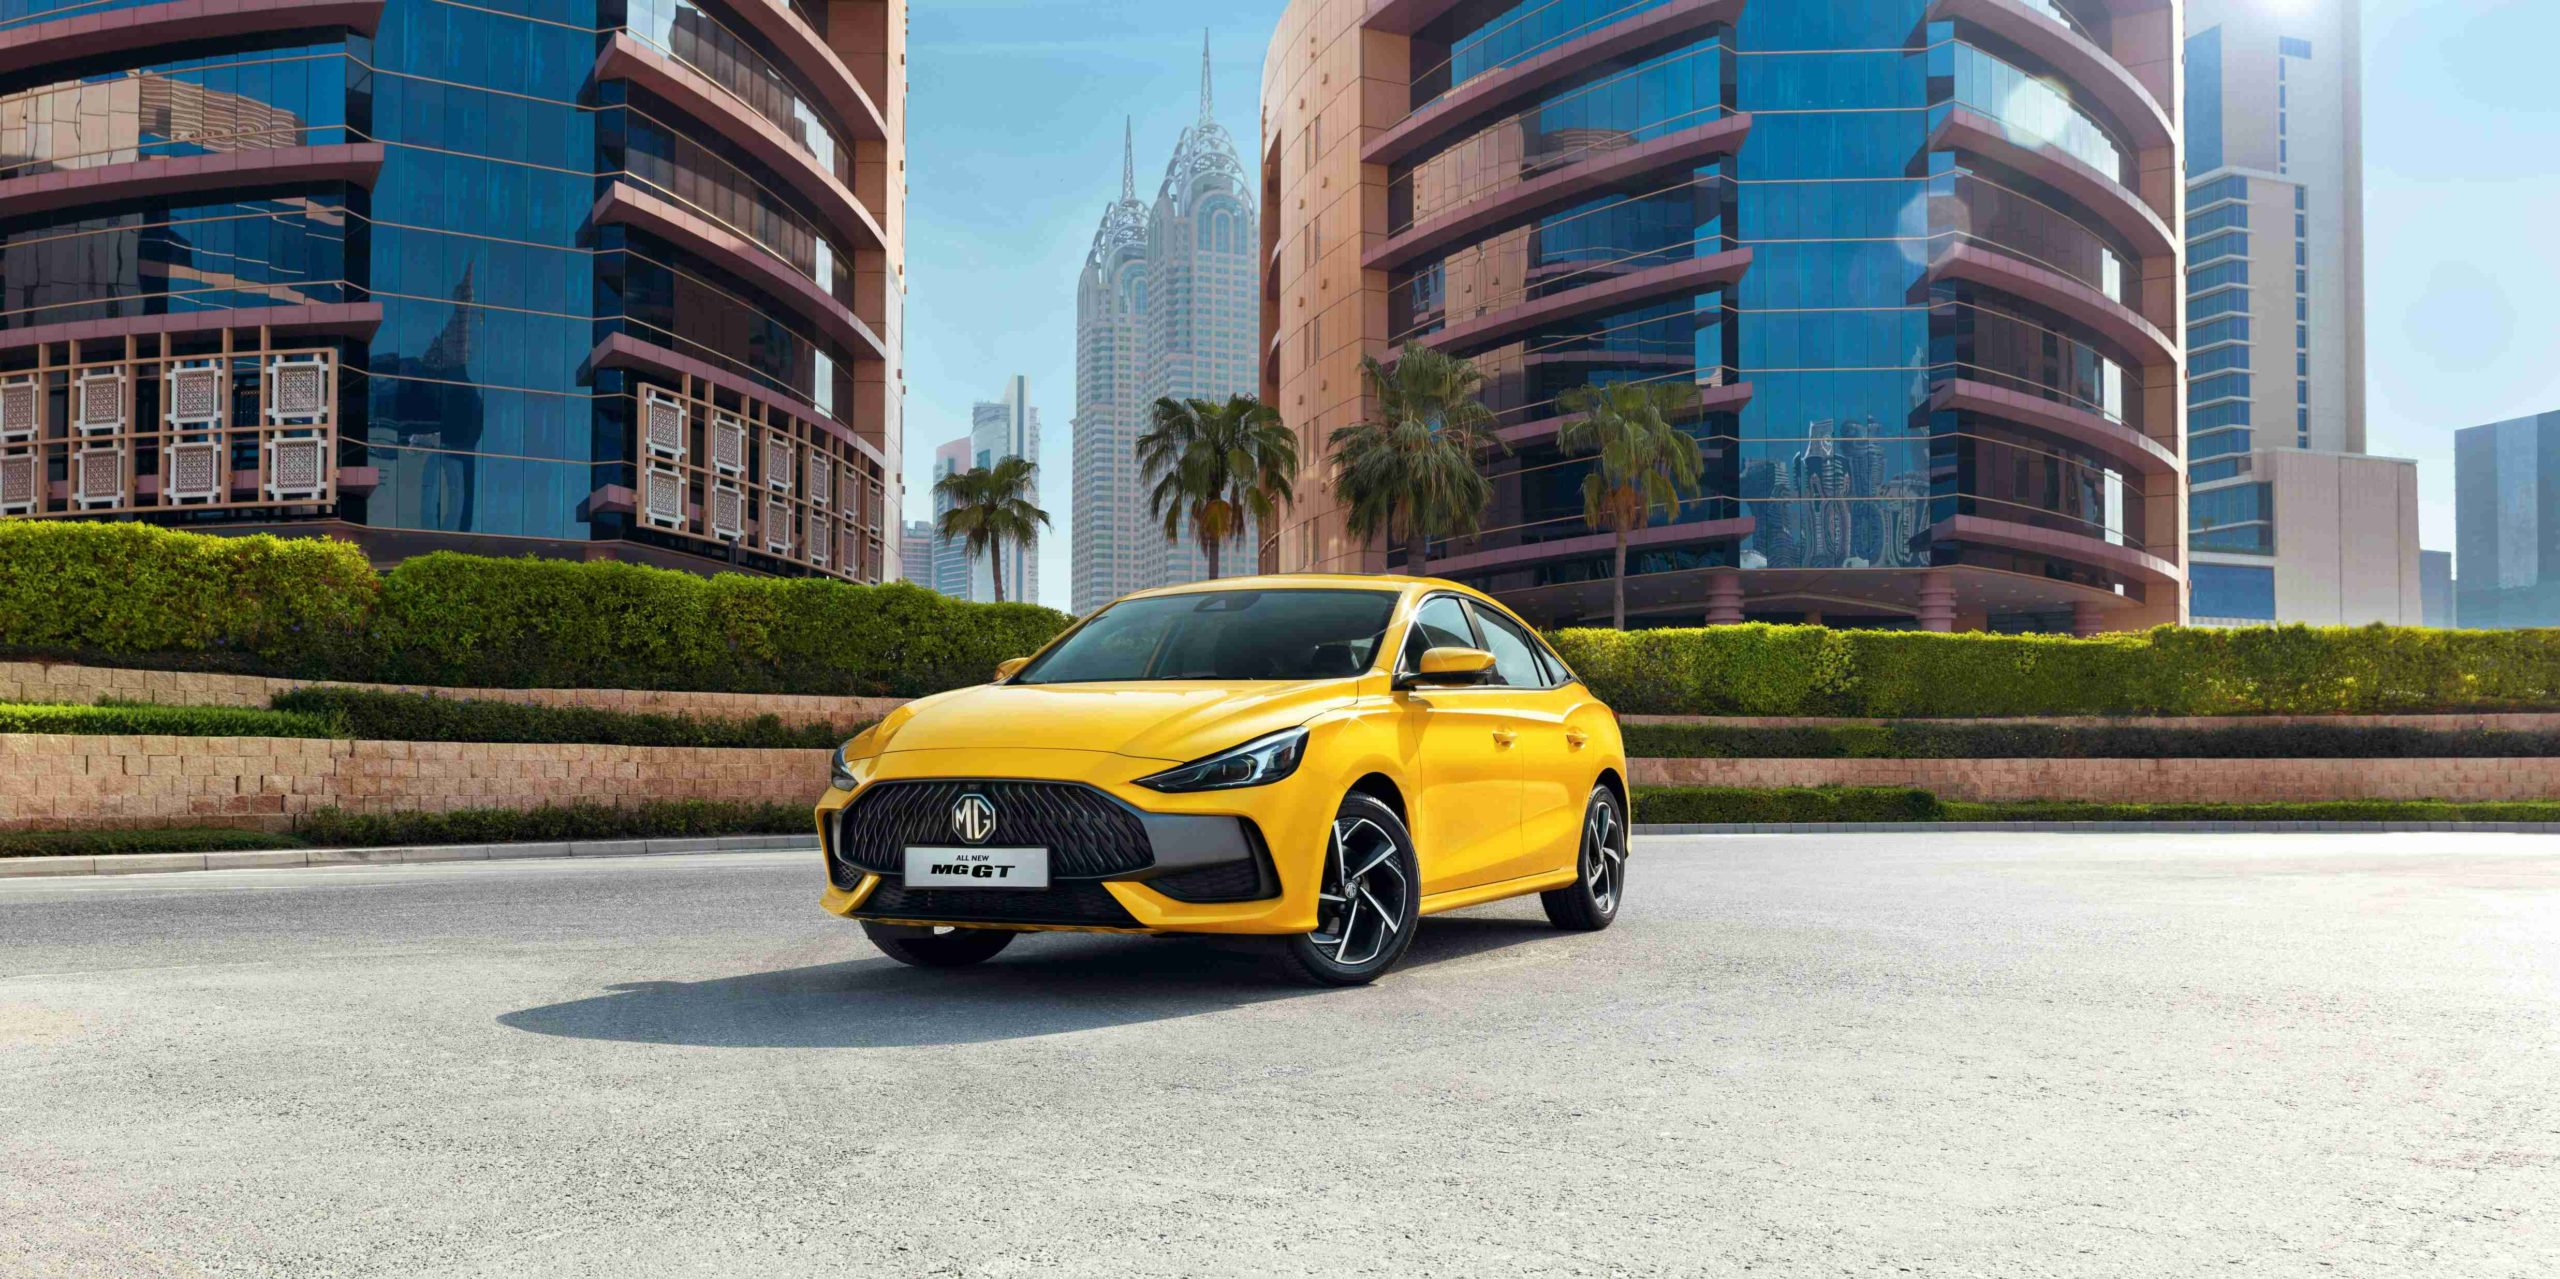 MG GT coming to lahore soon